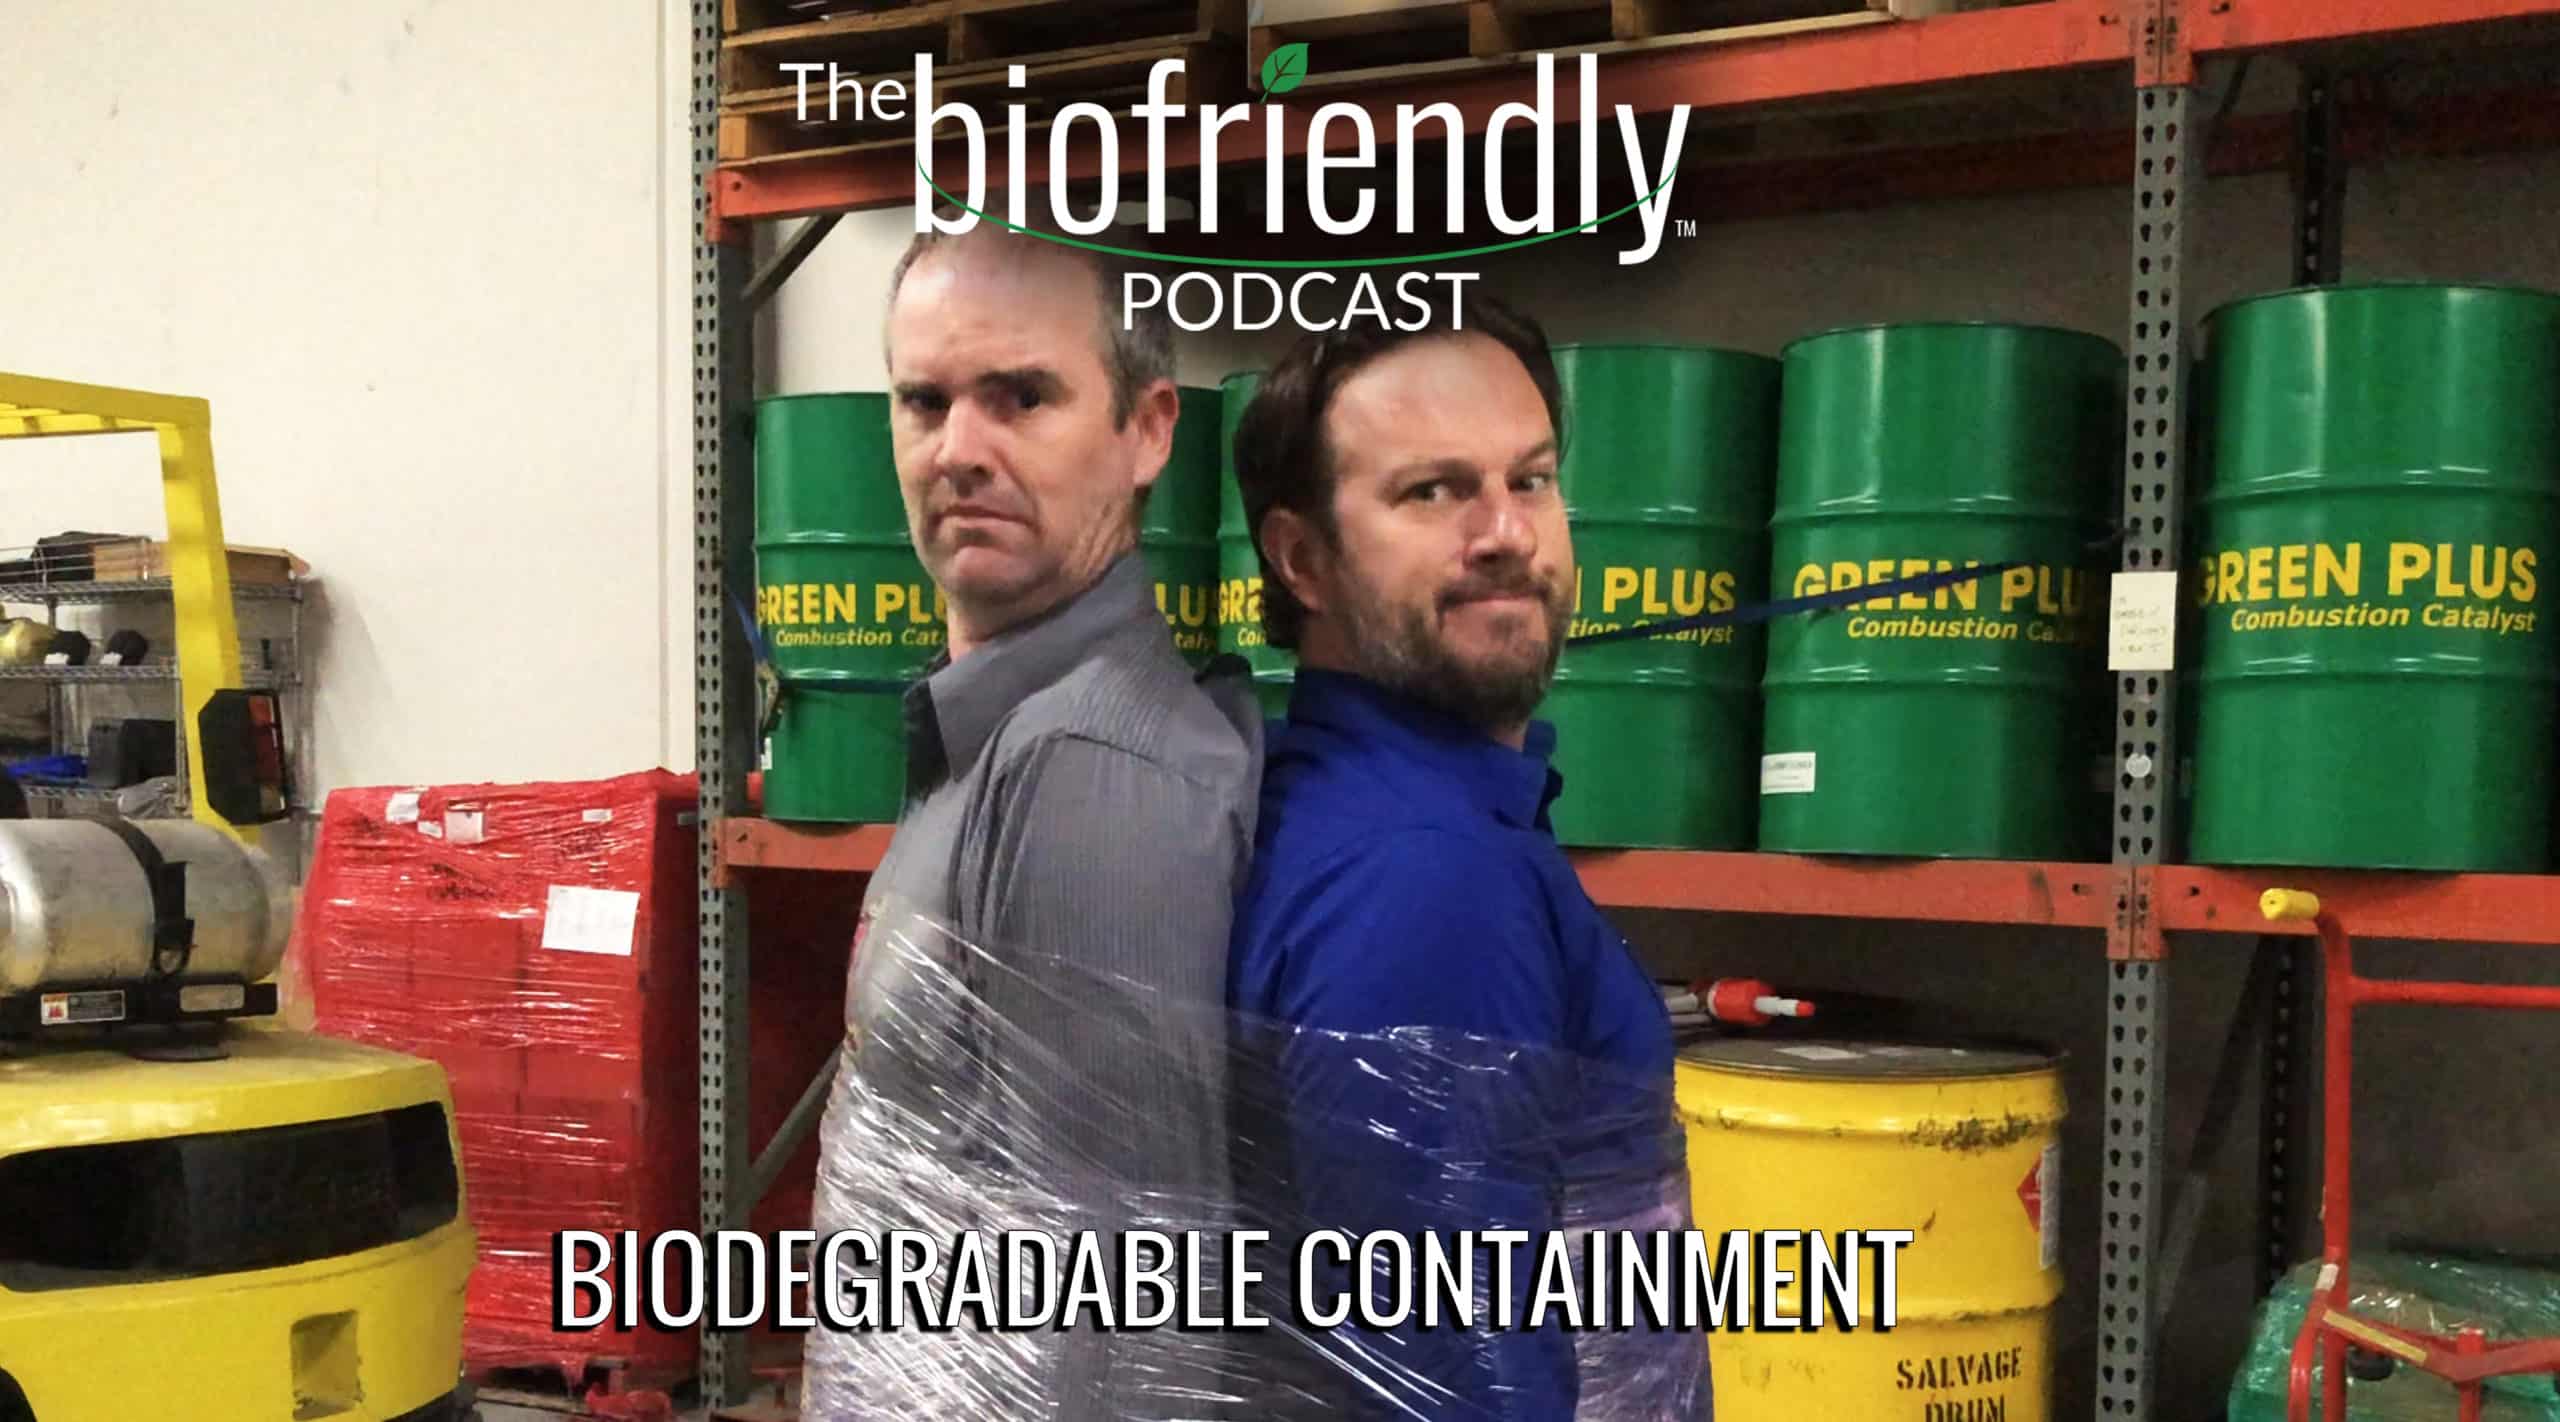 The Biofriendly Podcast - Episode 12 - Biodegradable Containment